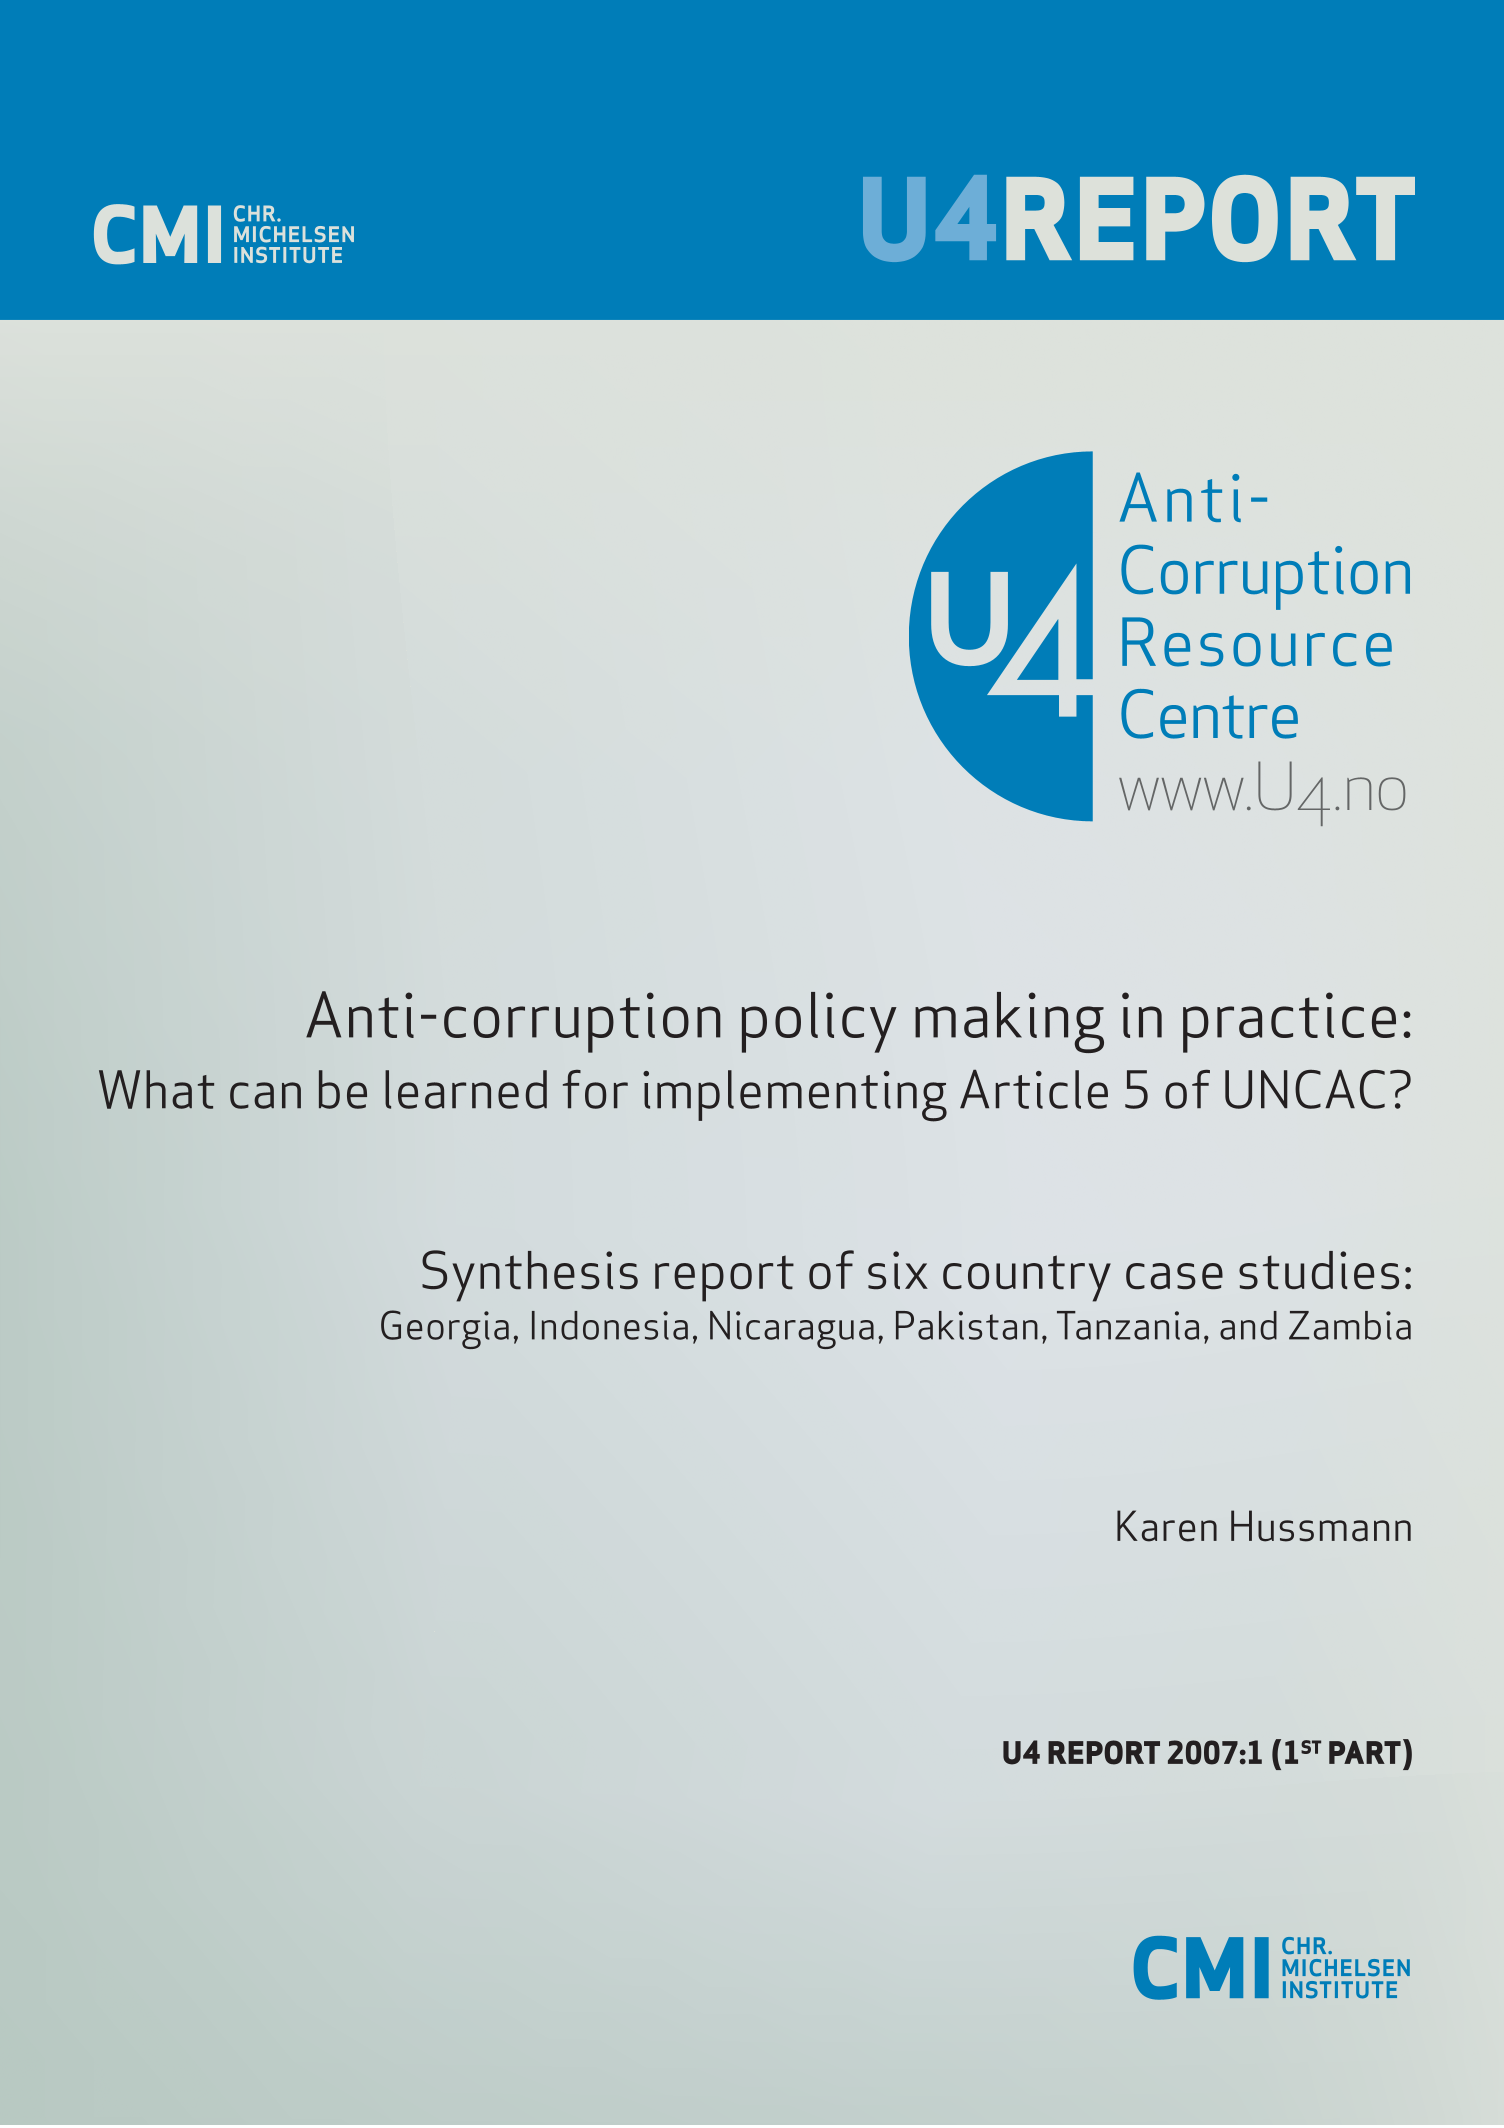 Anti-corruption policy making in practice: What can be learned for implementing Article 5 of UNCAC? Synthesis report of six country case studies: Georgia, Indonesia, Nicaragua, Pakistan, Tanzania, and Zambia